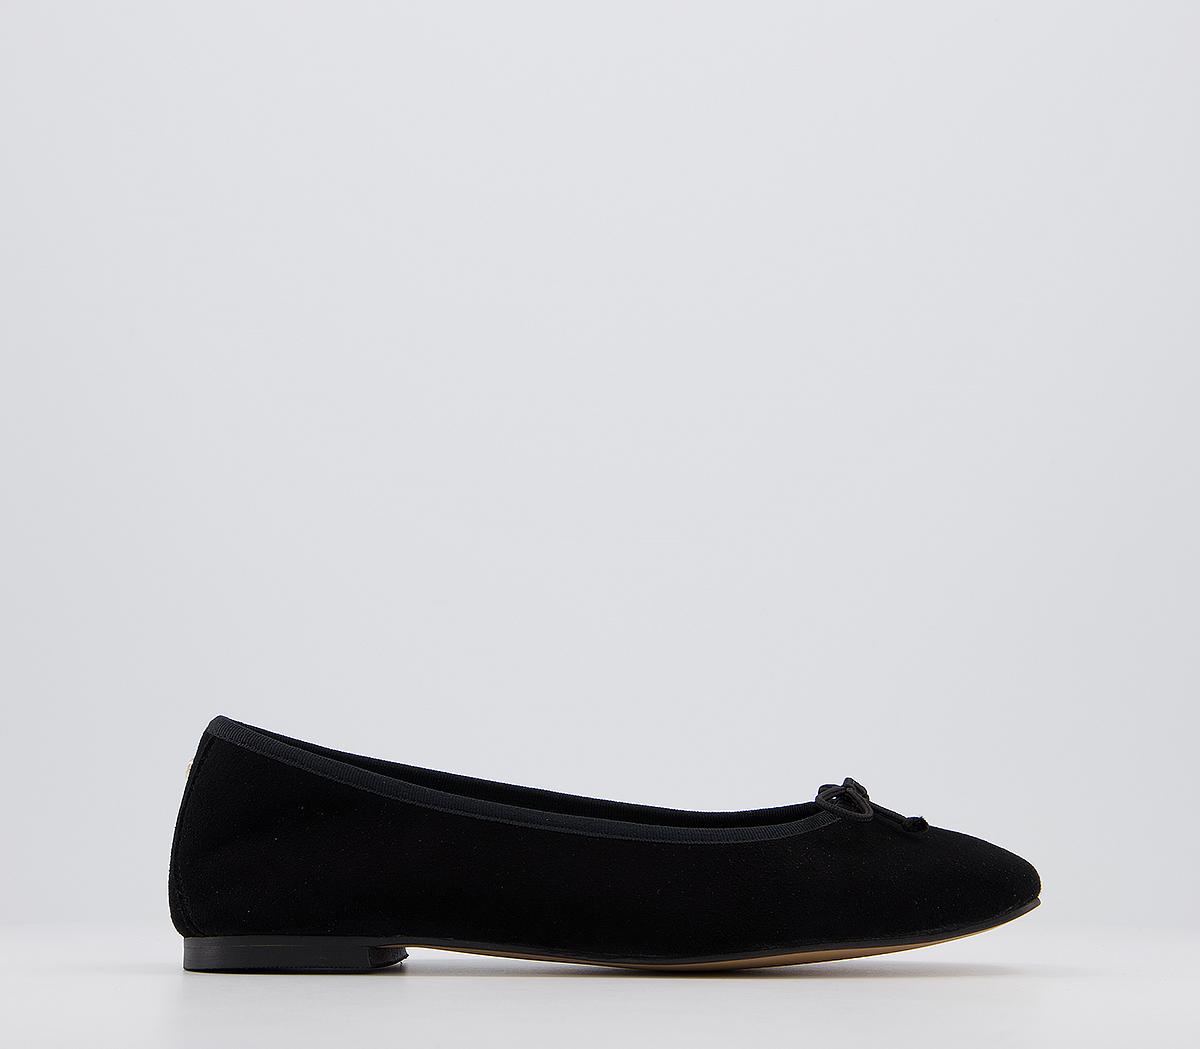 OFFICEFly away Square Toe Bow Ballerina FlatsBlack Suede